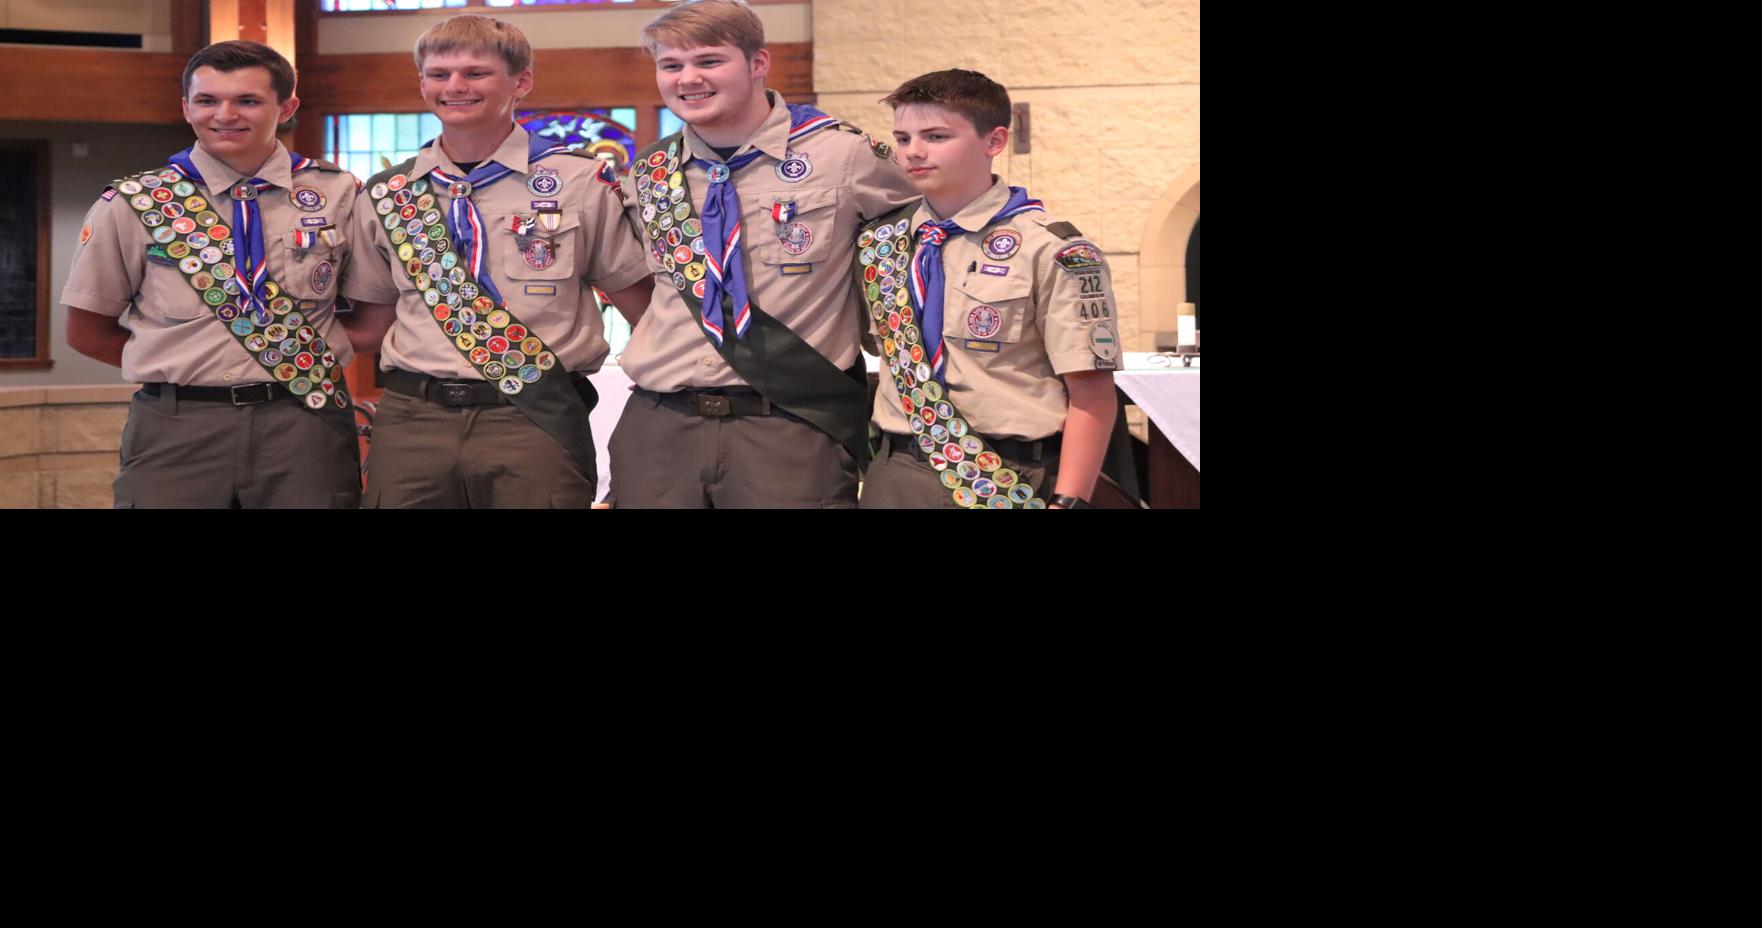 Quadruple Eagles: Columbus sees four Boy Scouts of America Eagle Scout  ceremonies in one weekend